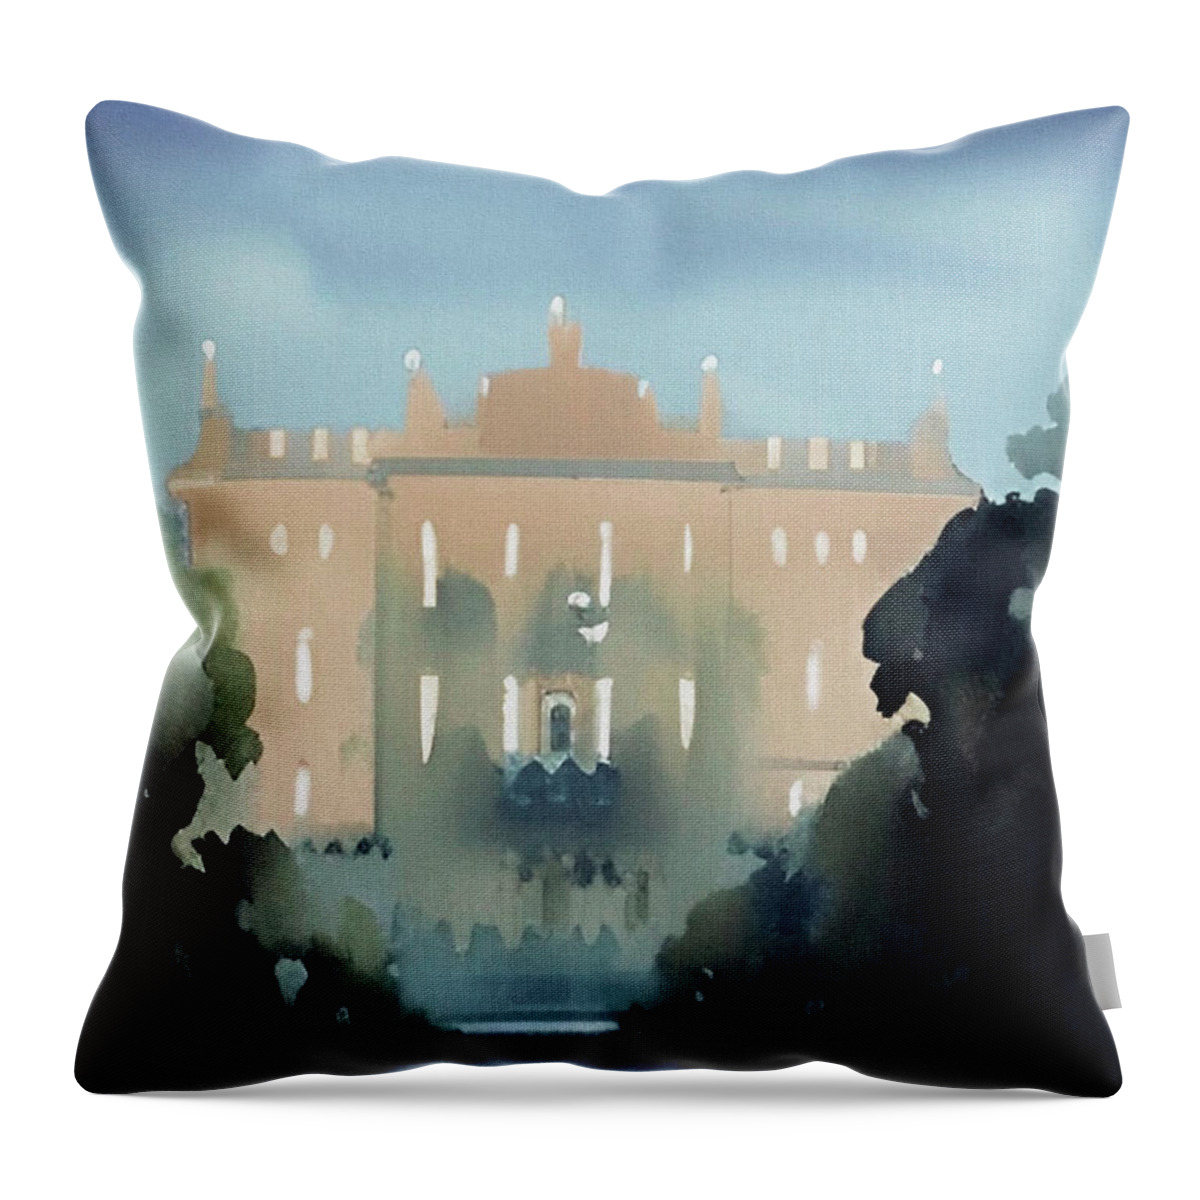  Throw Pillow featuring the digital art Presidential Palace by Michelle Hoffmann